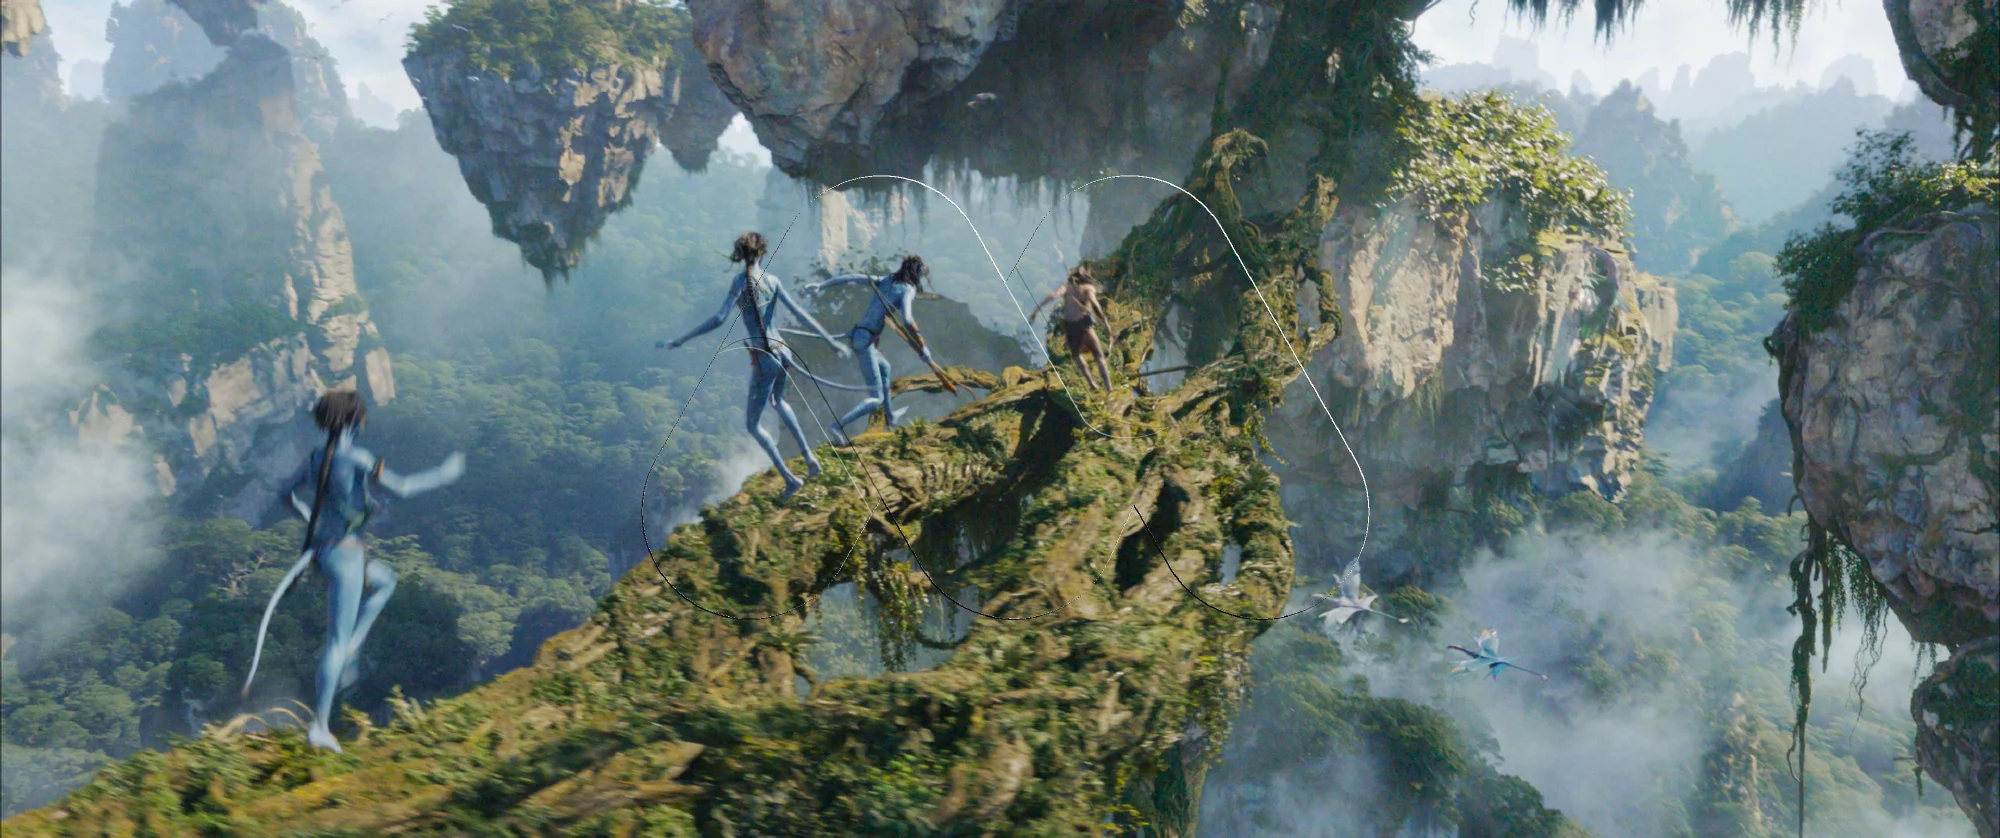 avatar-the-way-of-water-exposes-massive-new-stills-10